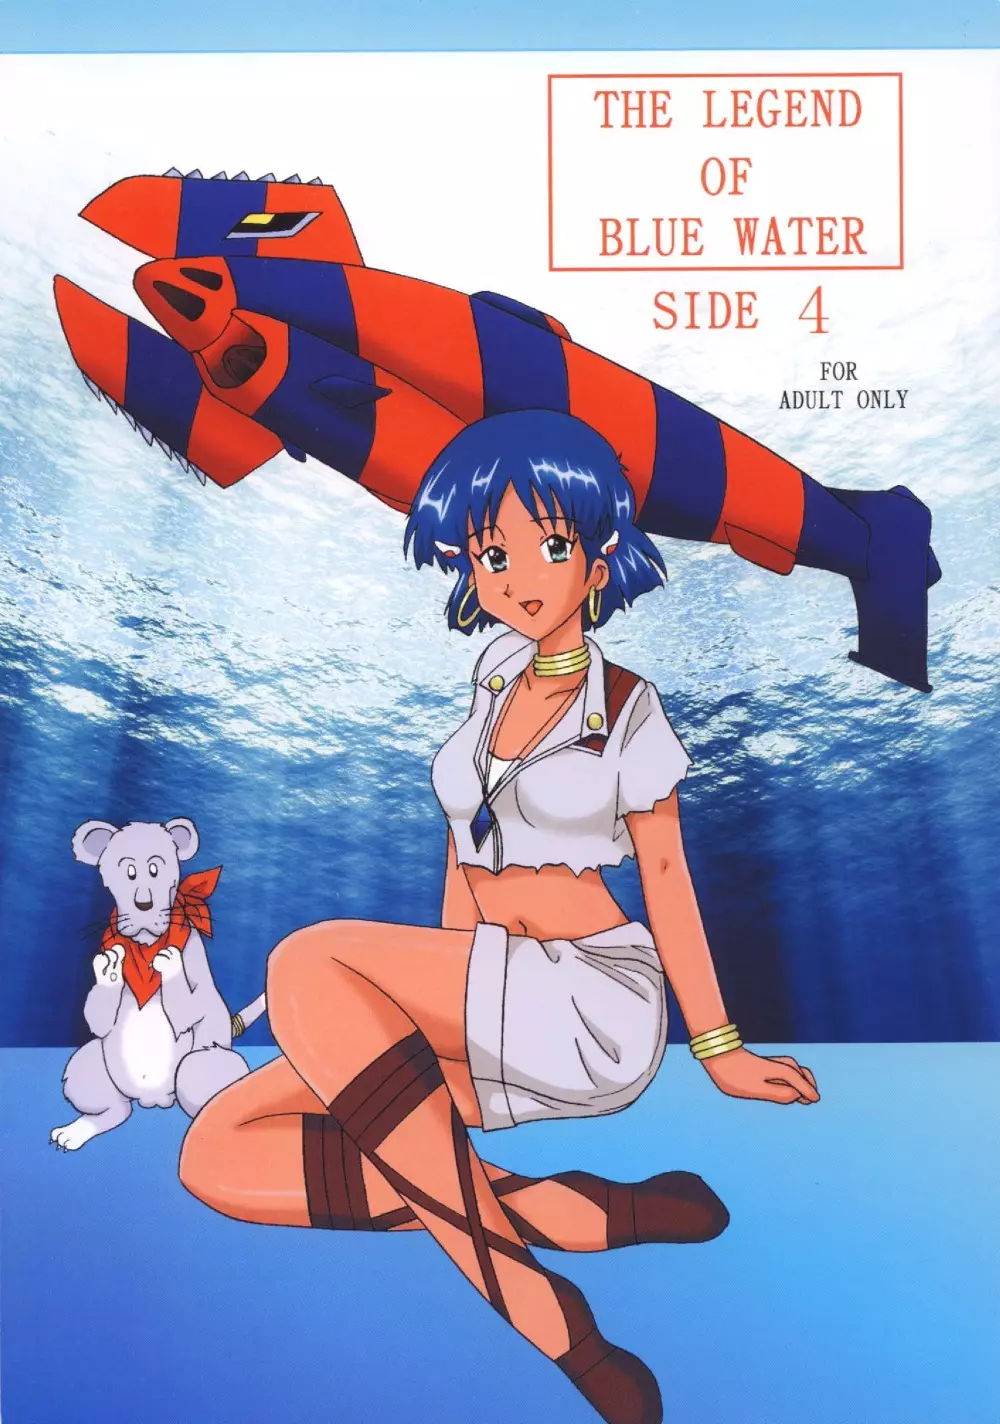 THE LEGEND OF BLUE WATER SIDE 4